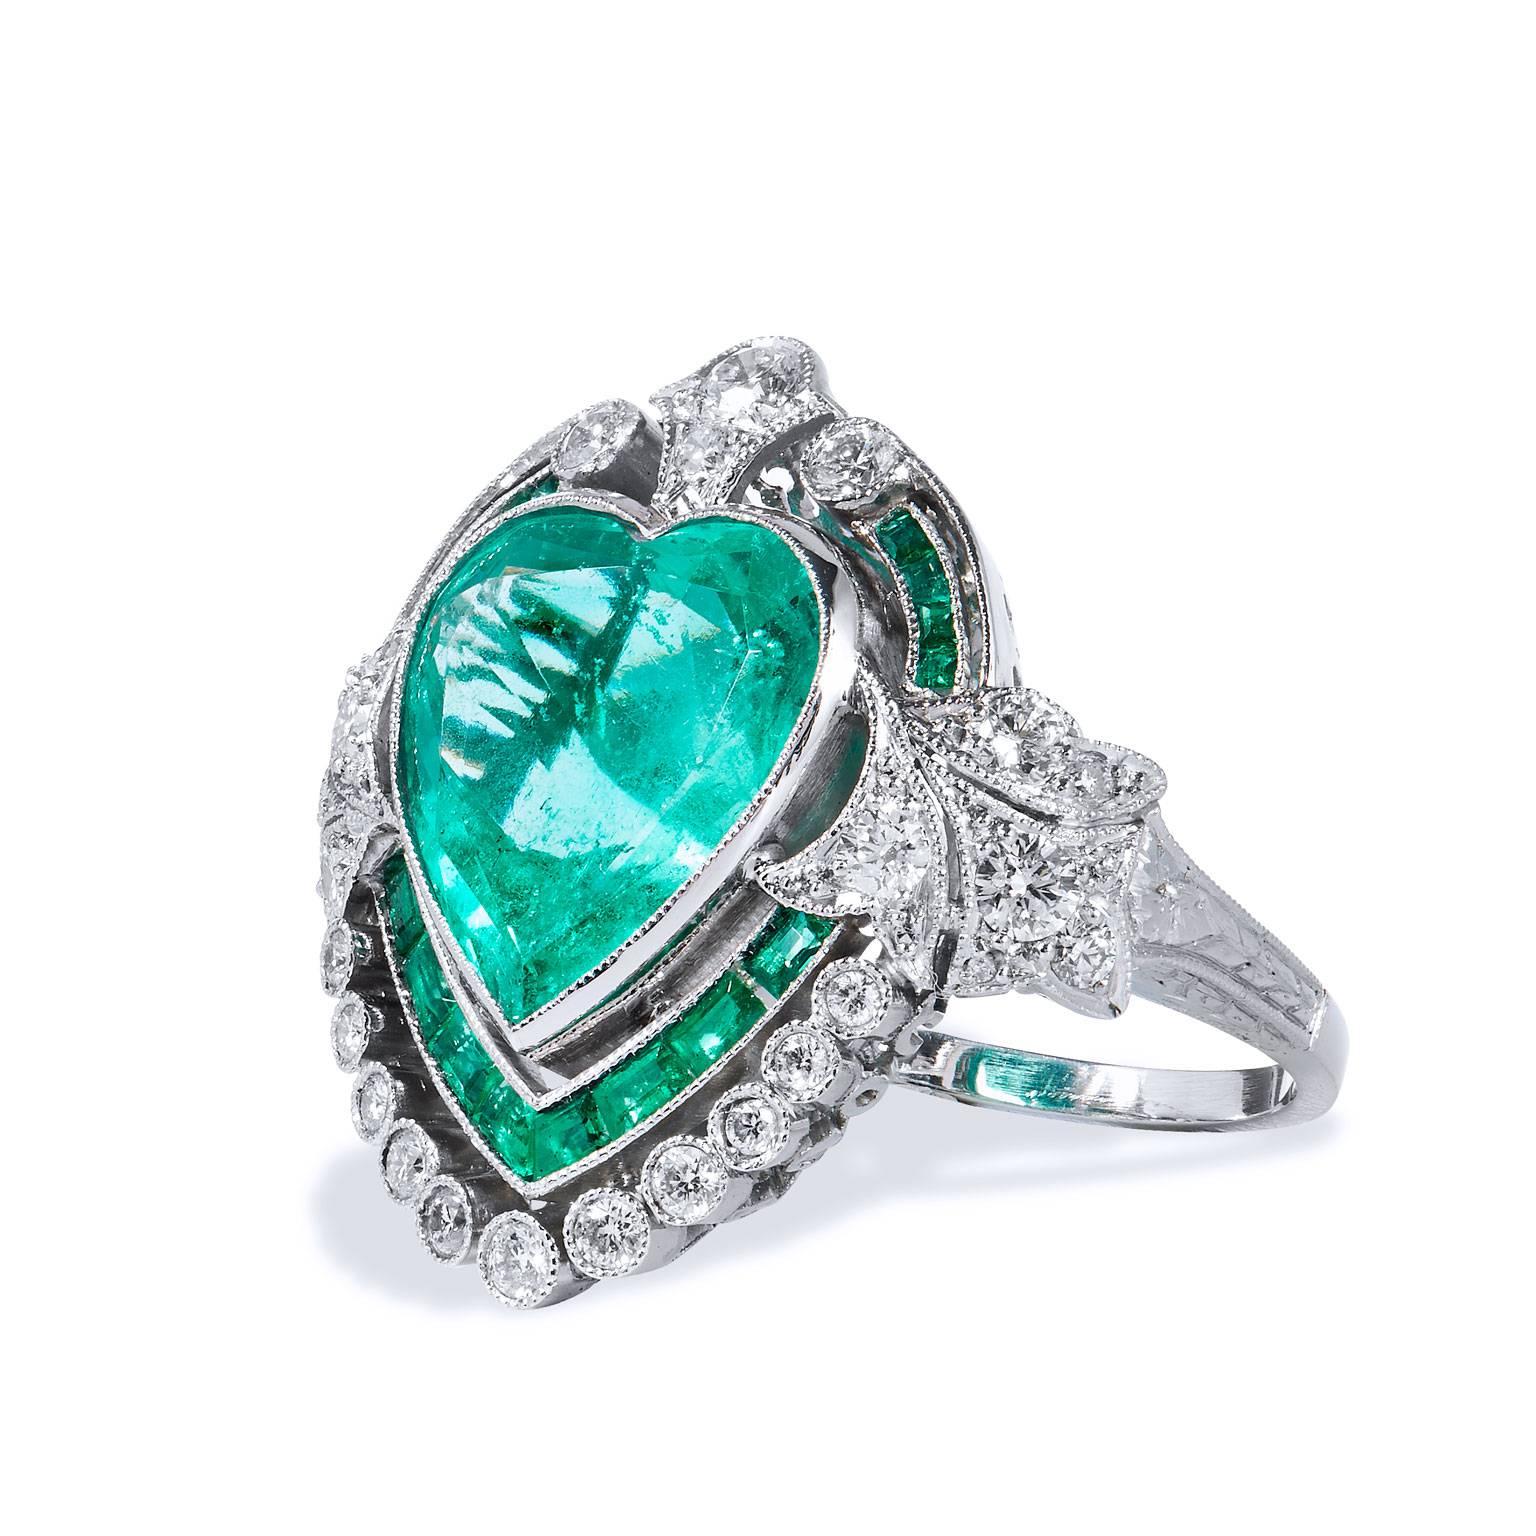 Art Deco Inspired 5.87 Carat Heart Shaped Colombian Emerald and Diamond Platinum Ring

This amazing ring has been handcrafted in platinum, this is a new ring that has been created in an Art Deco style.  
It features a stunning 5.87 carat Colombian